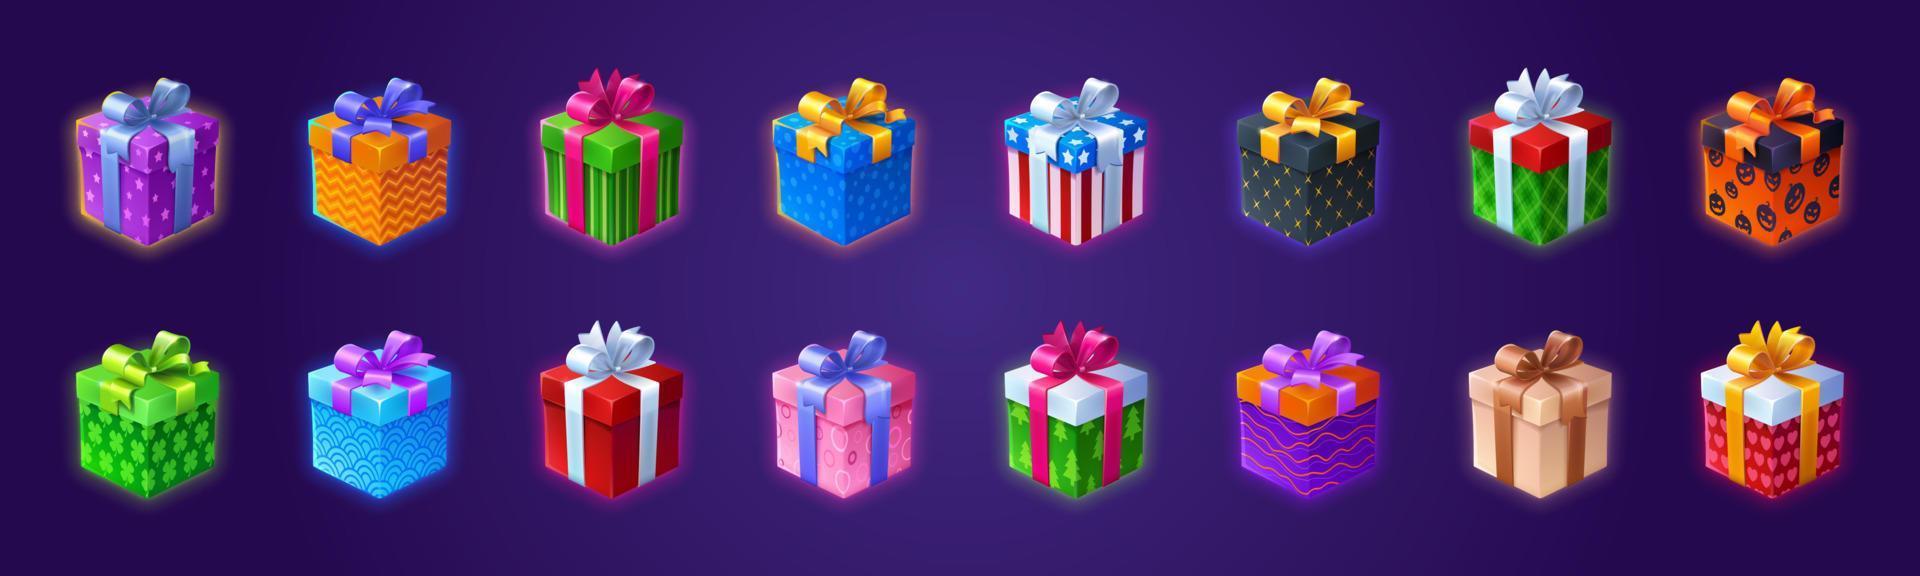 Gift boxes 3d presents in colorful wrapping paper vector